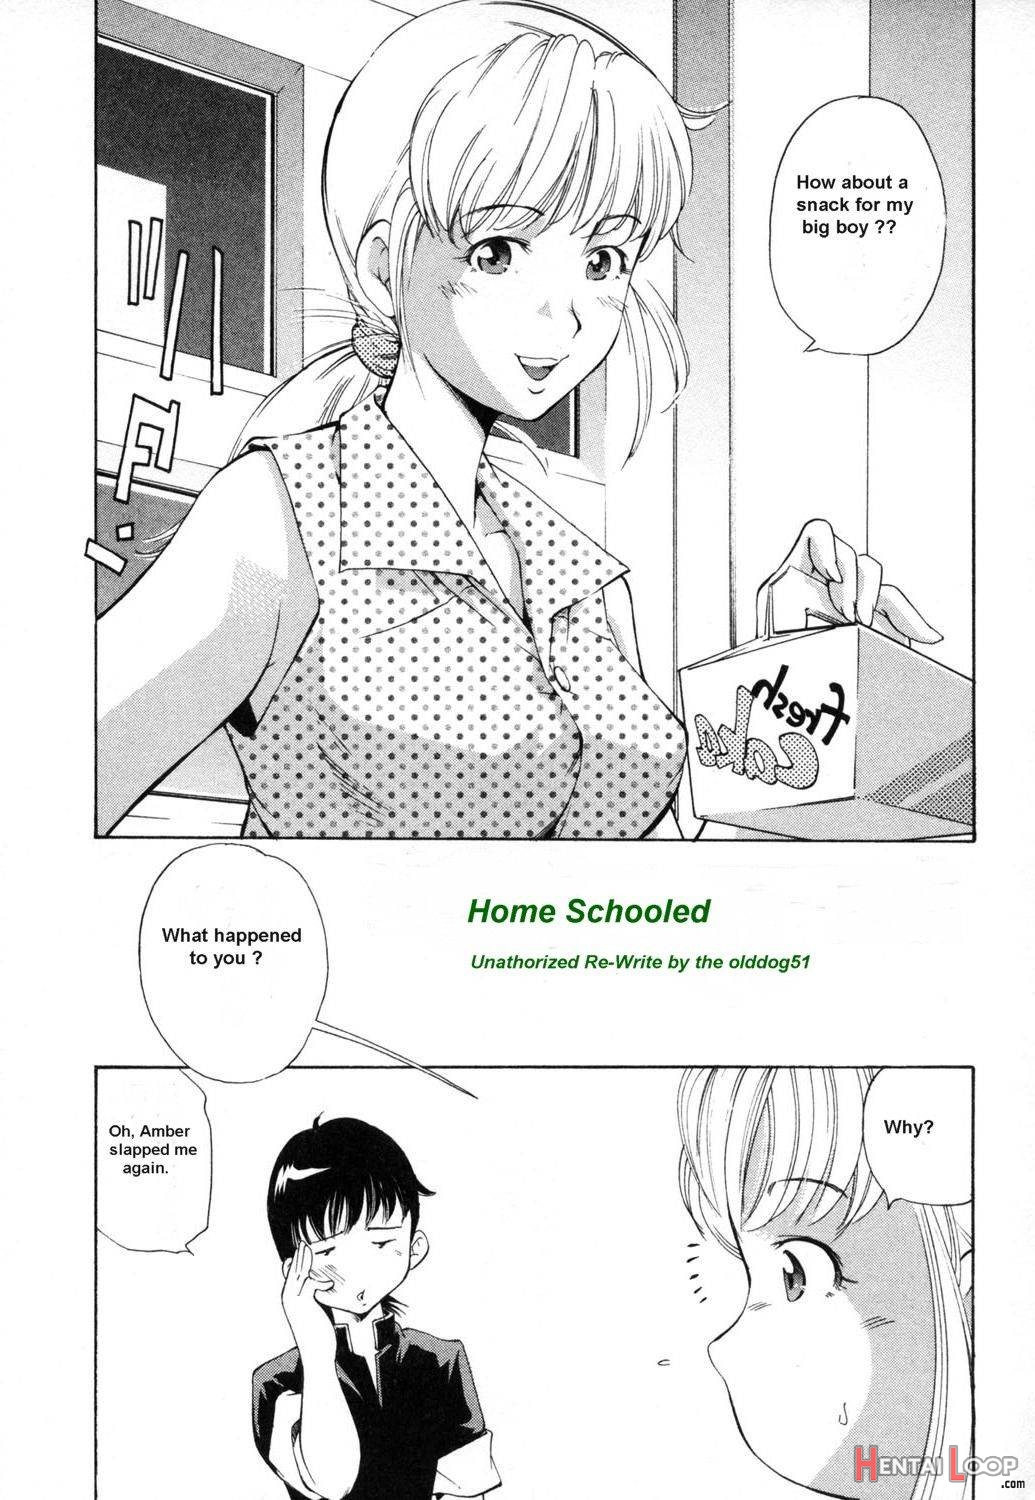 Home Schooled page 2